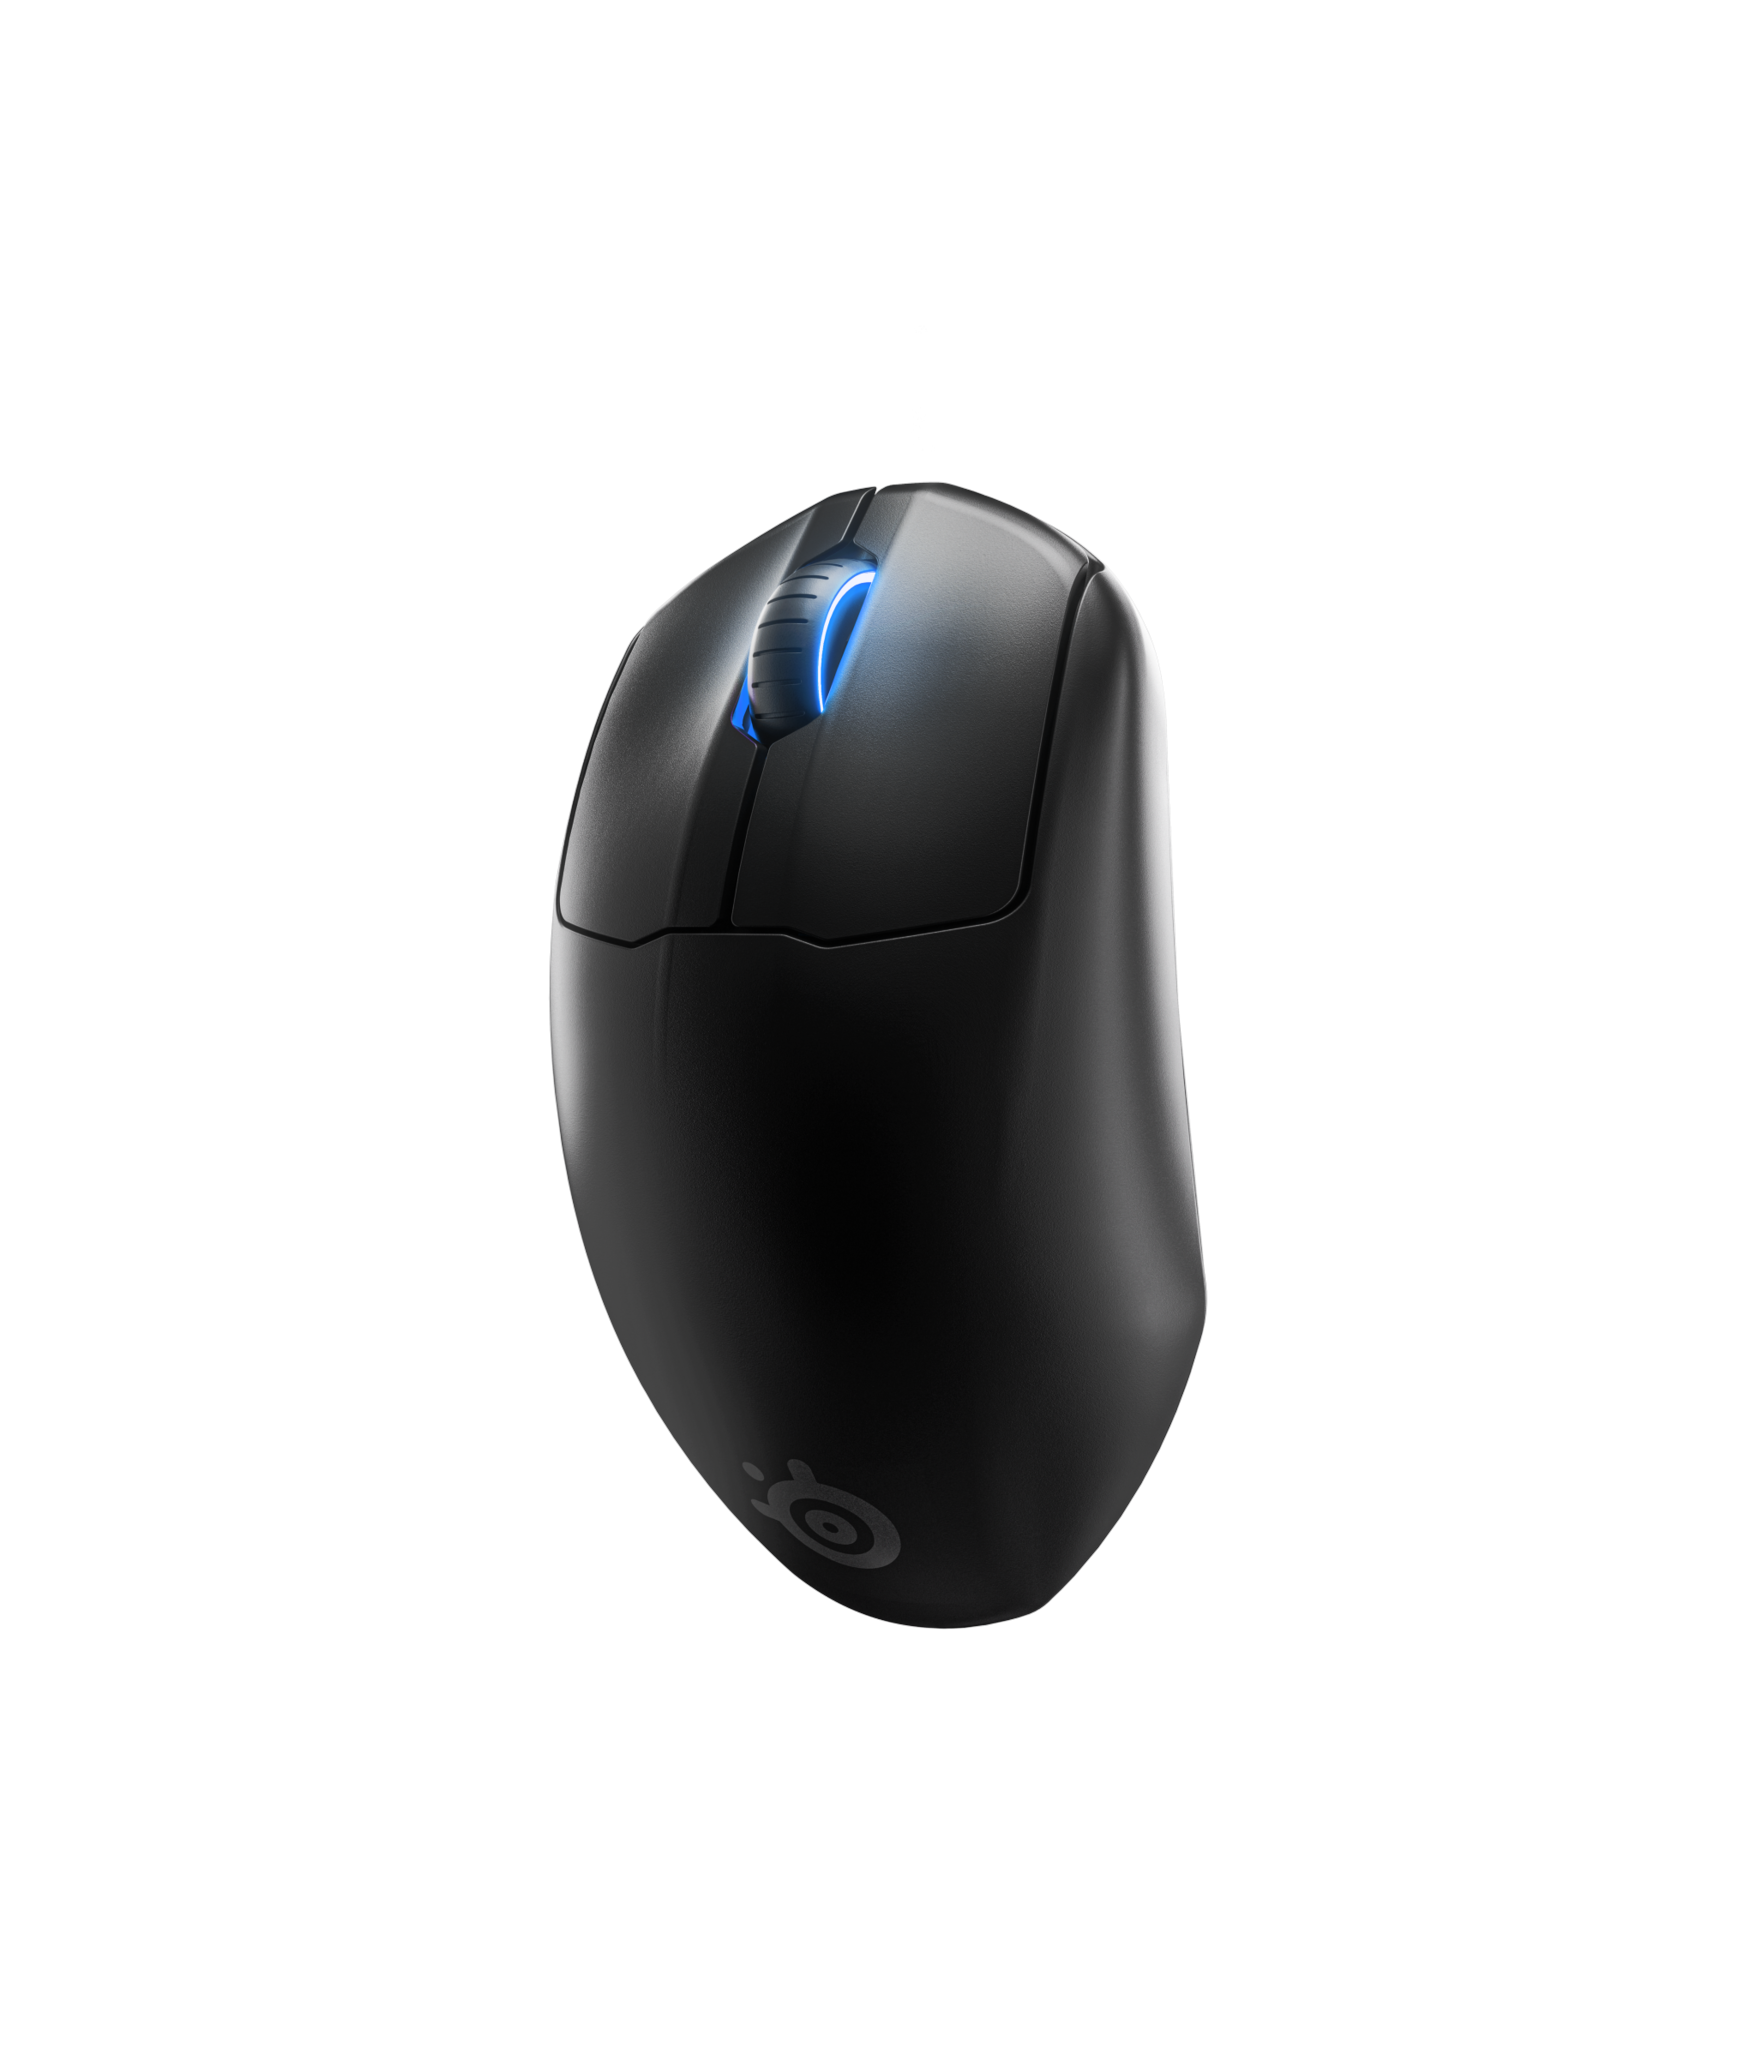 Steelseries - Prime Wireless Gaming Mouse